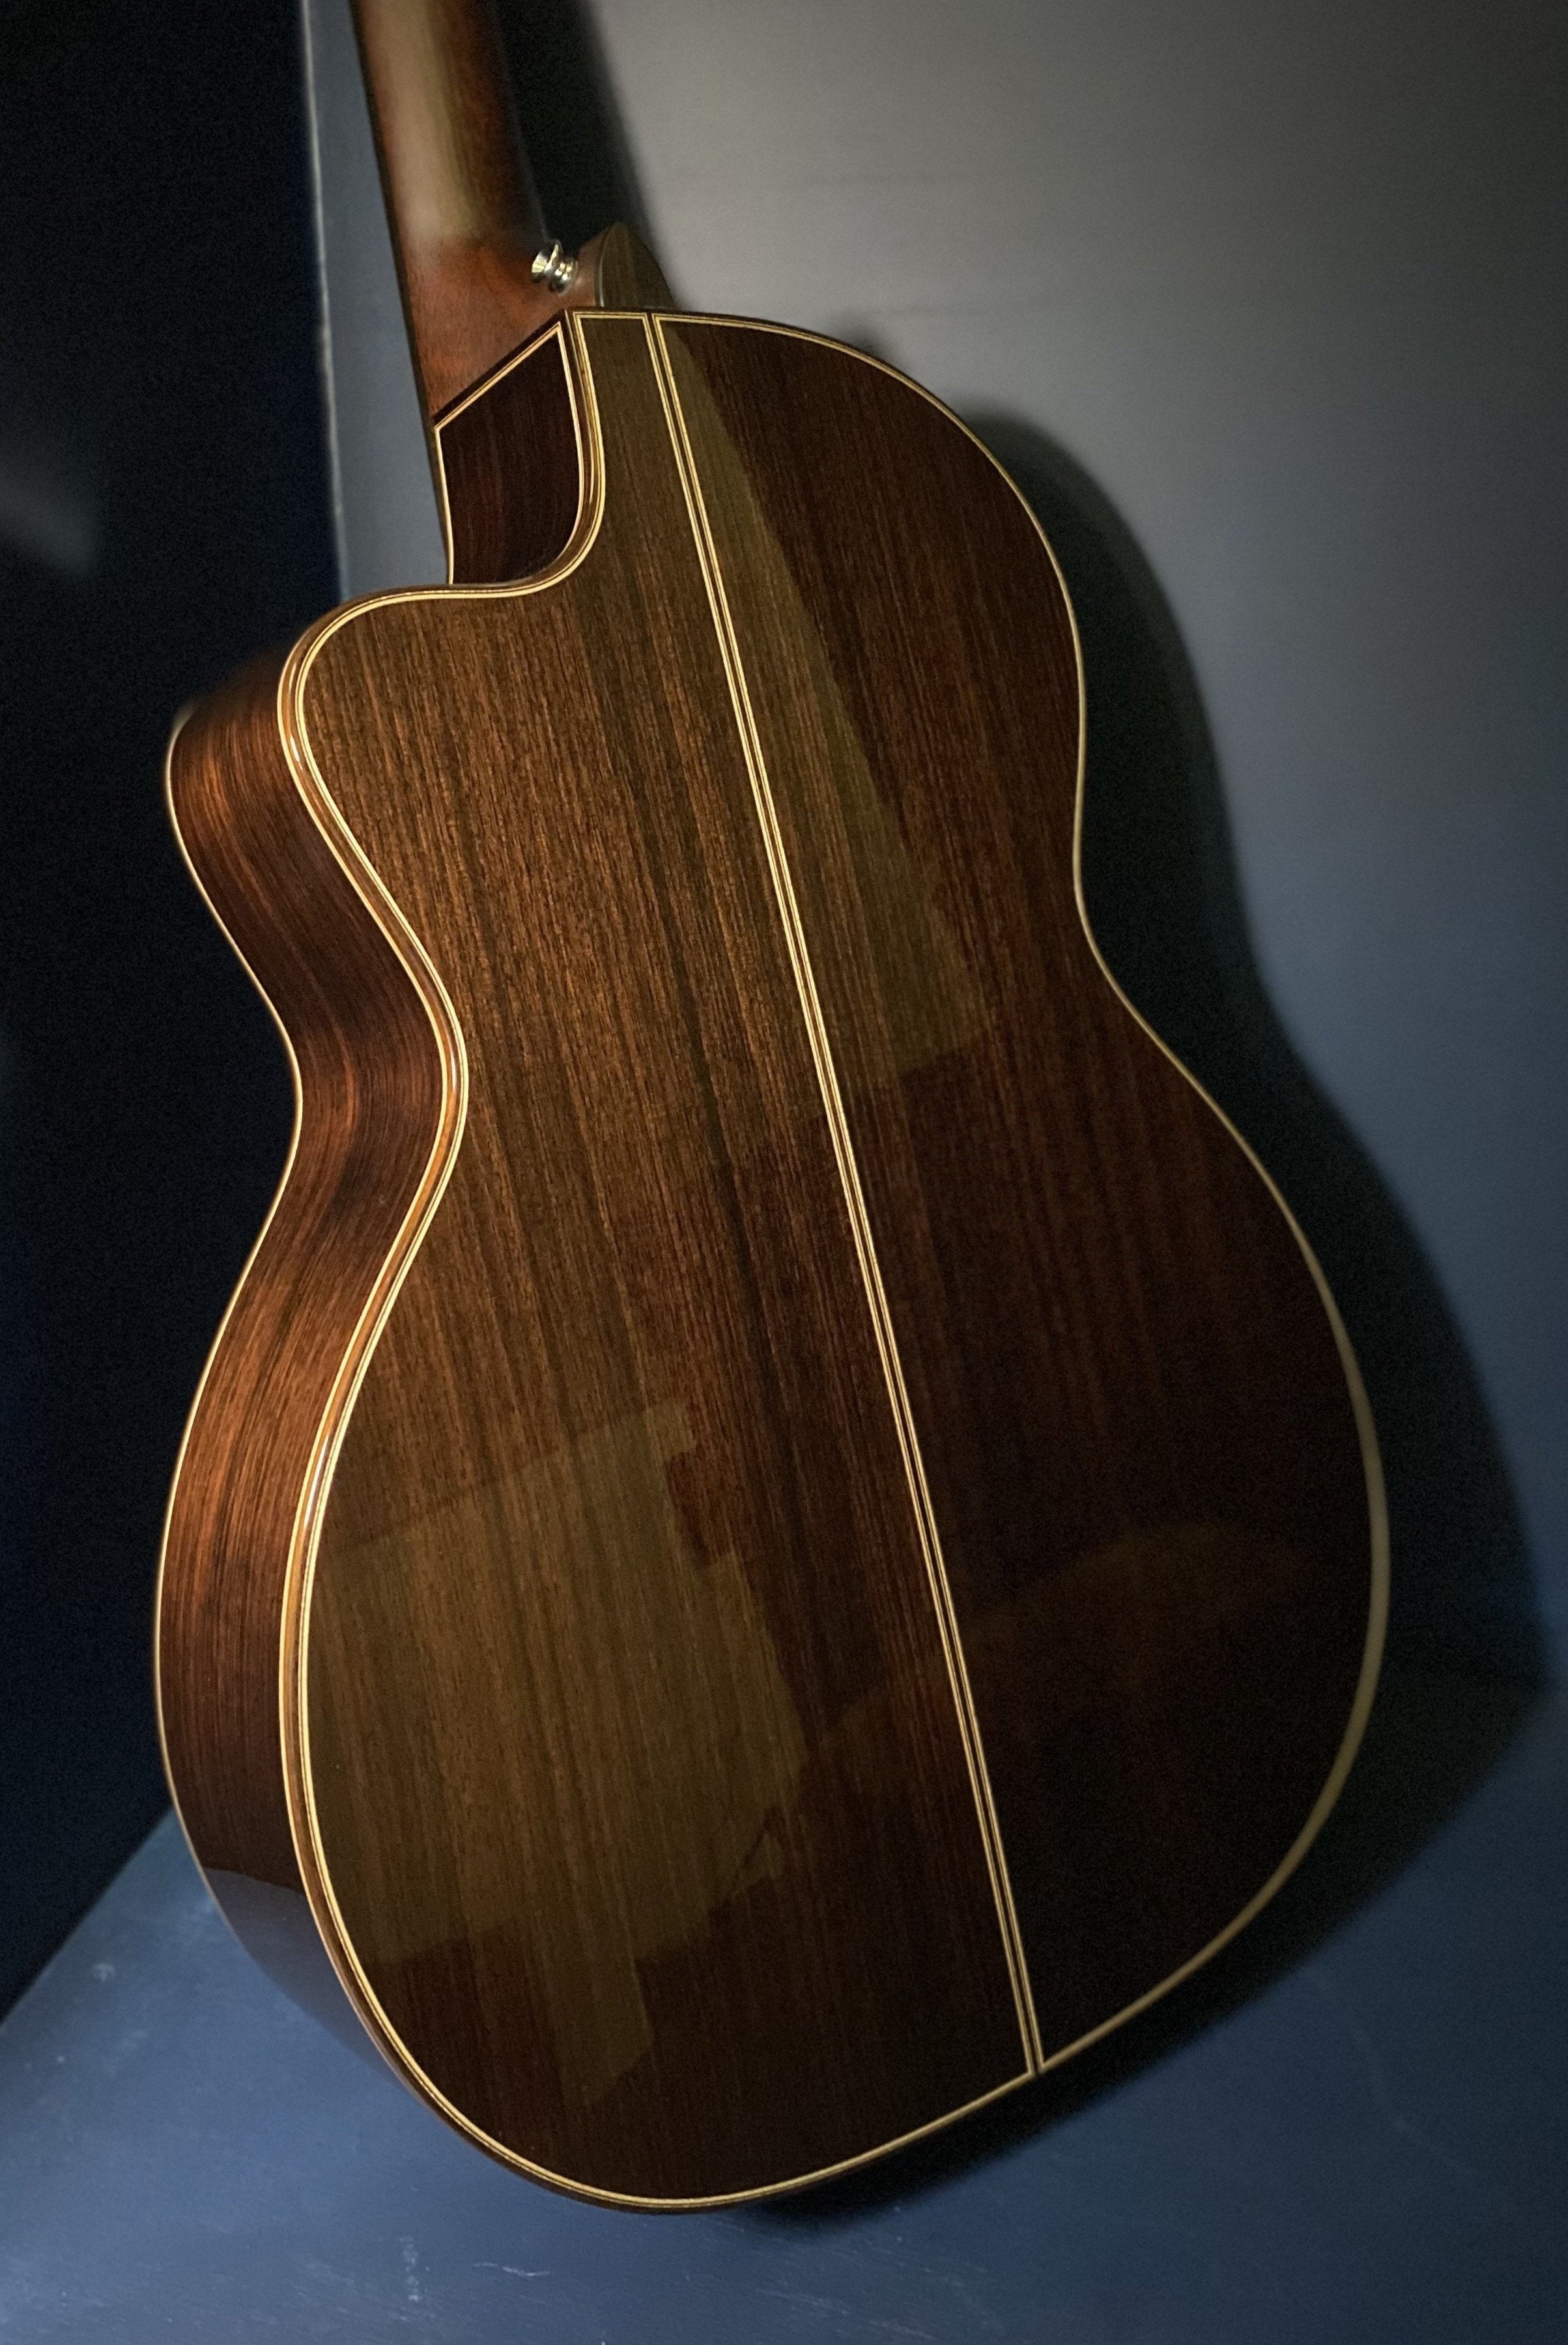 AUDEN ROSEWOOD SERIES – CHESTER 45 CEDAR CUTAWAY, Electro Acoustic Guitar for sale at Richards Guitars.